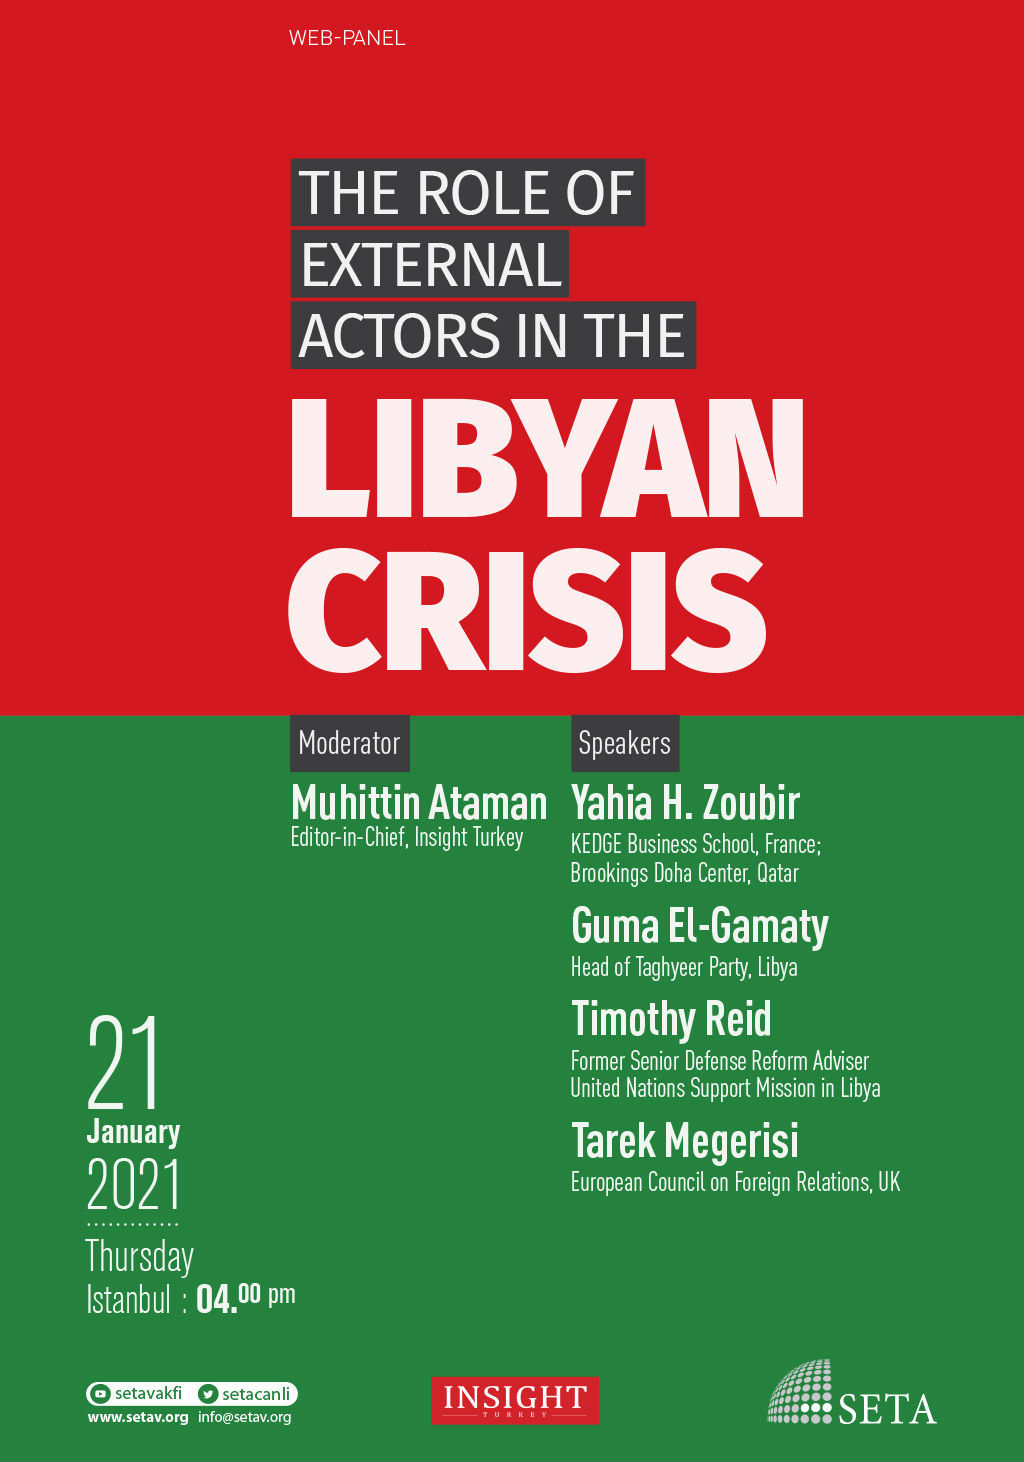 The Role of External Actors in the Libyan Crisis